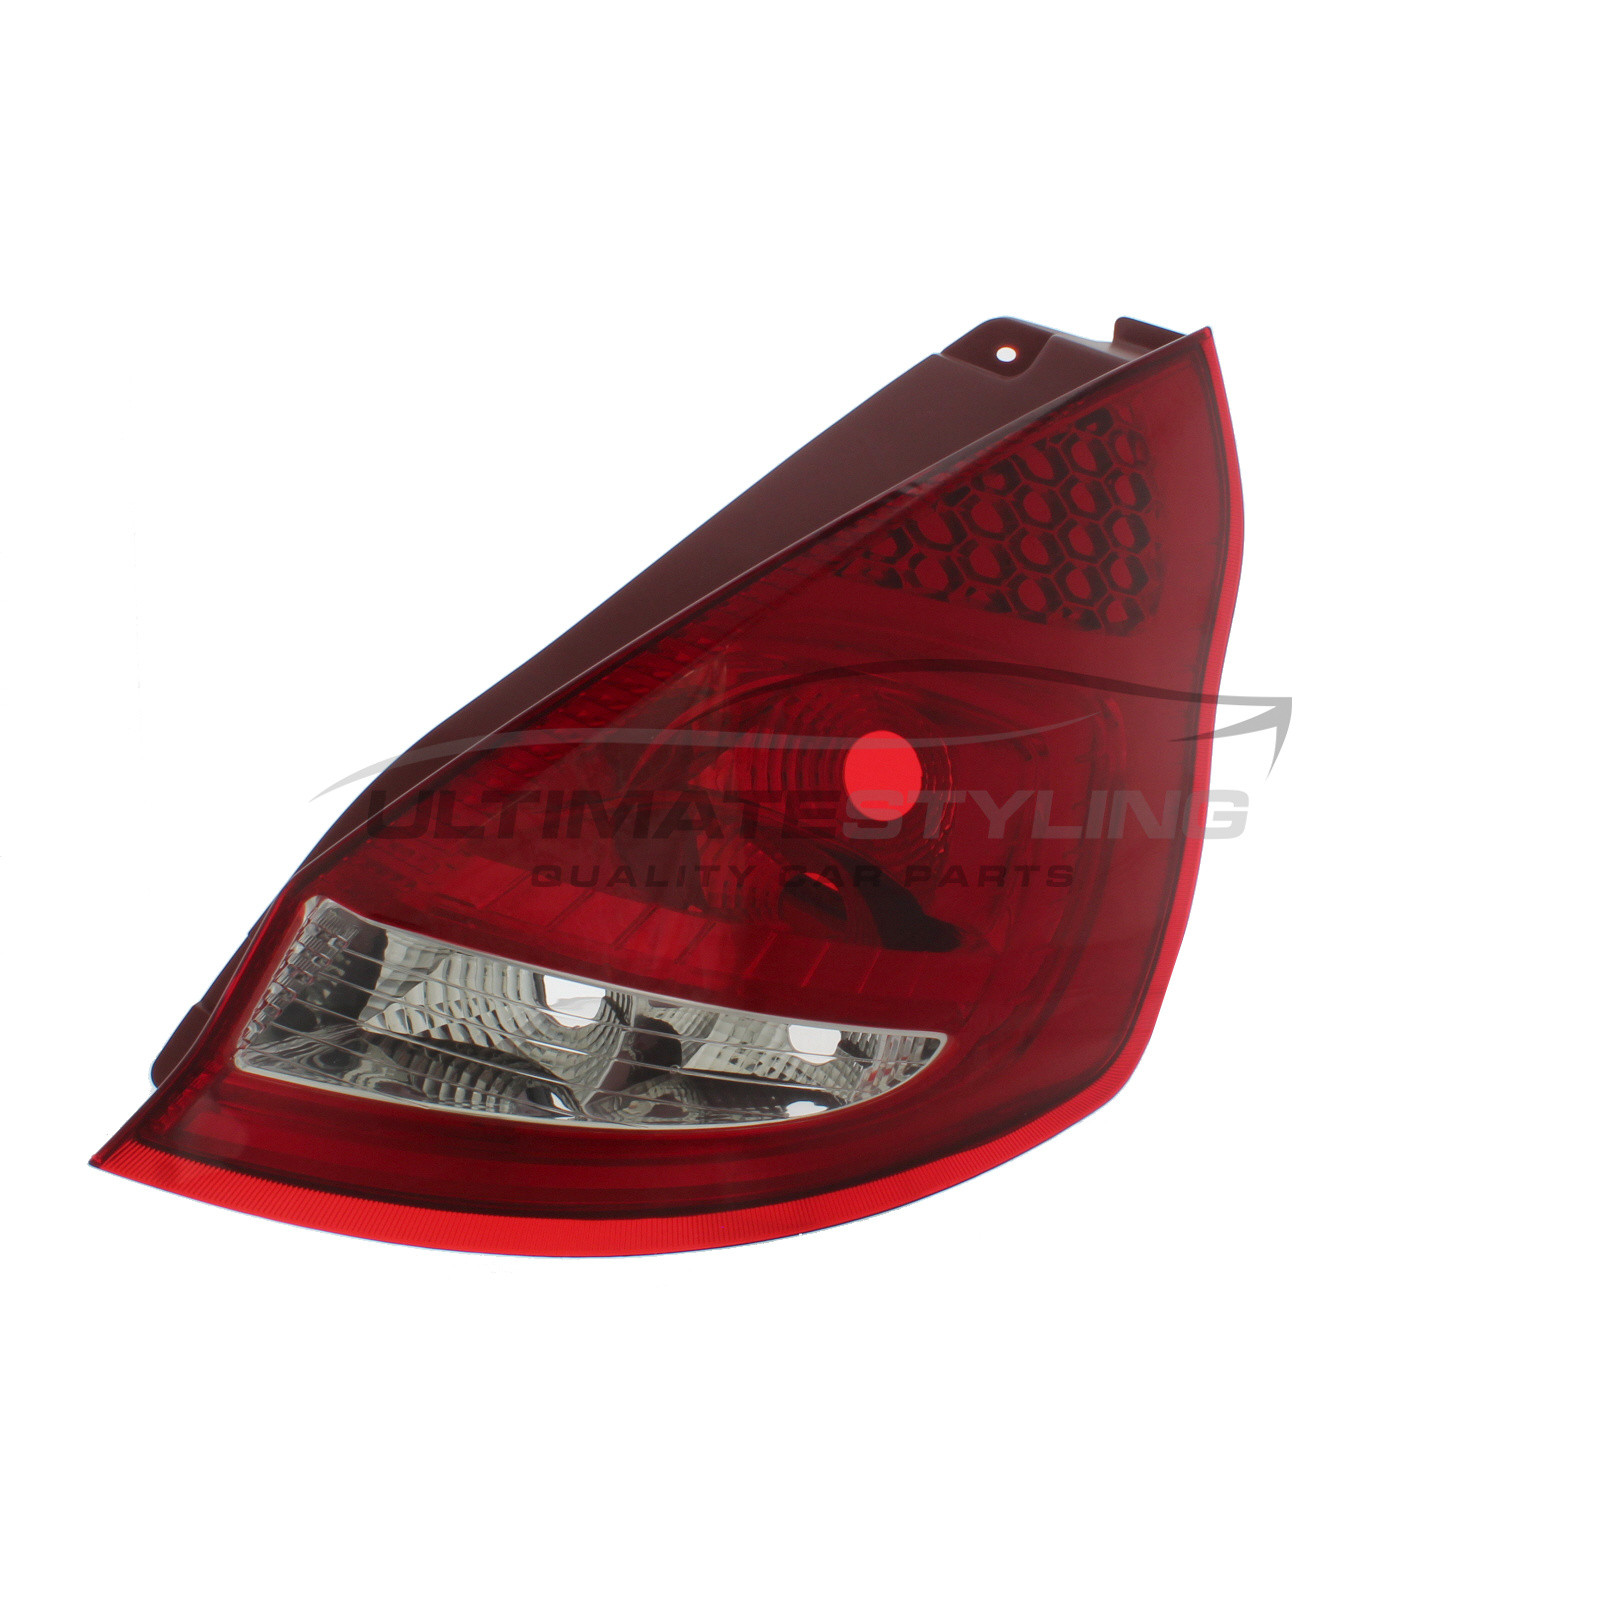 Ford Fiesta 2008-2013 Non-LED with Clear Indicator Rear Light / Tail Light Excluding Bulb Holder Drivers Side (RH)